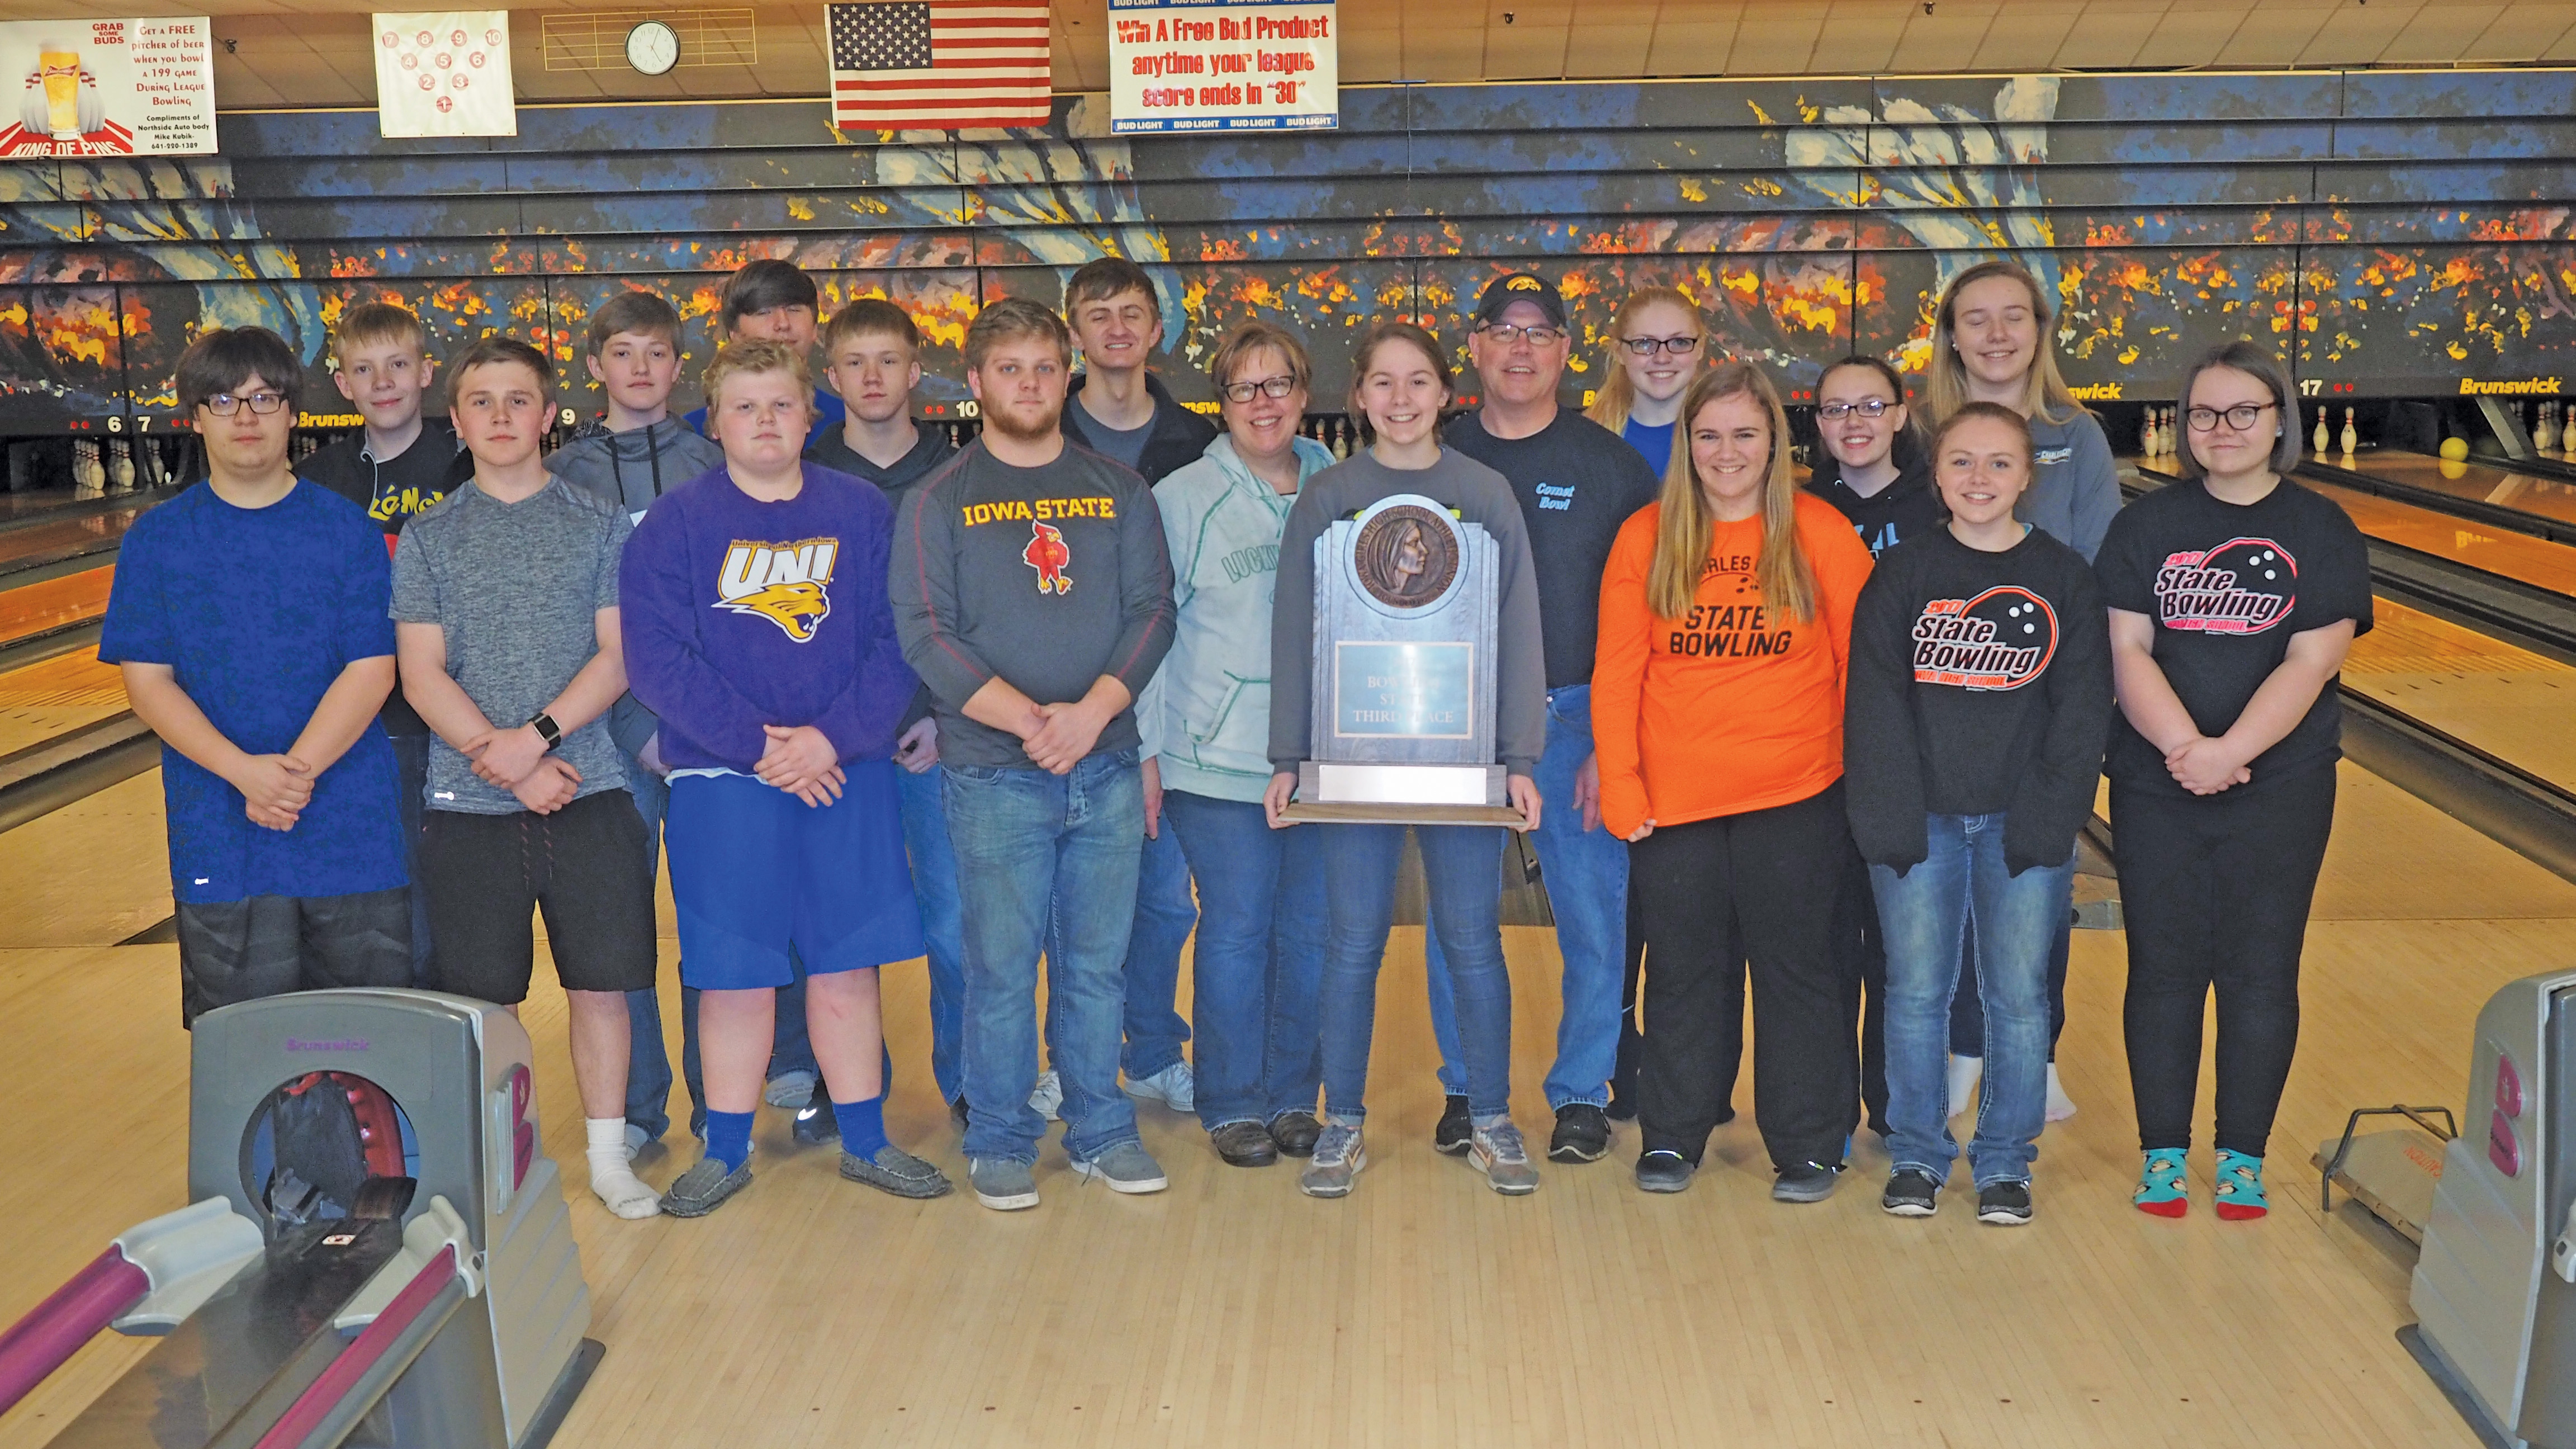 Comet bowlers honor Comet Bowl owners for their support